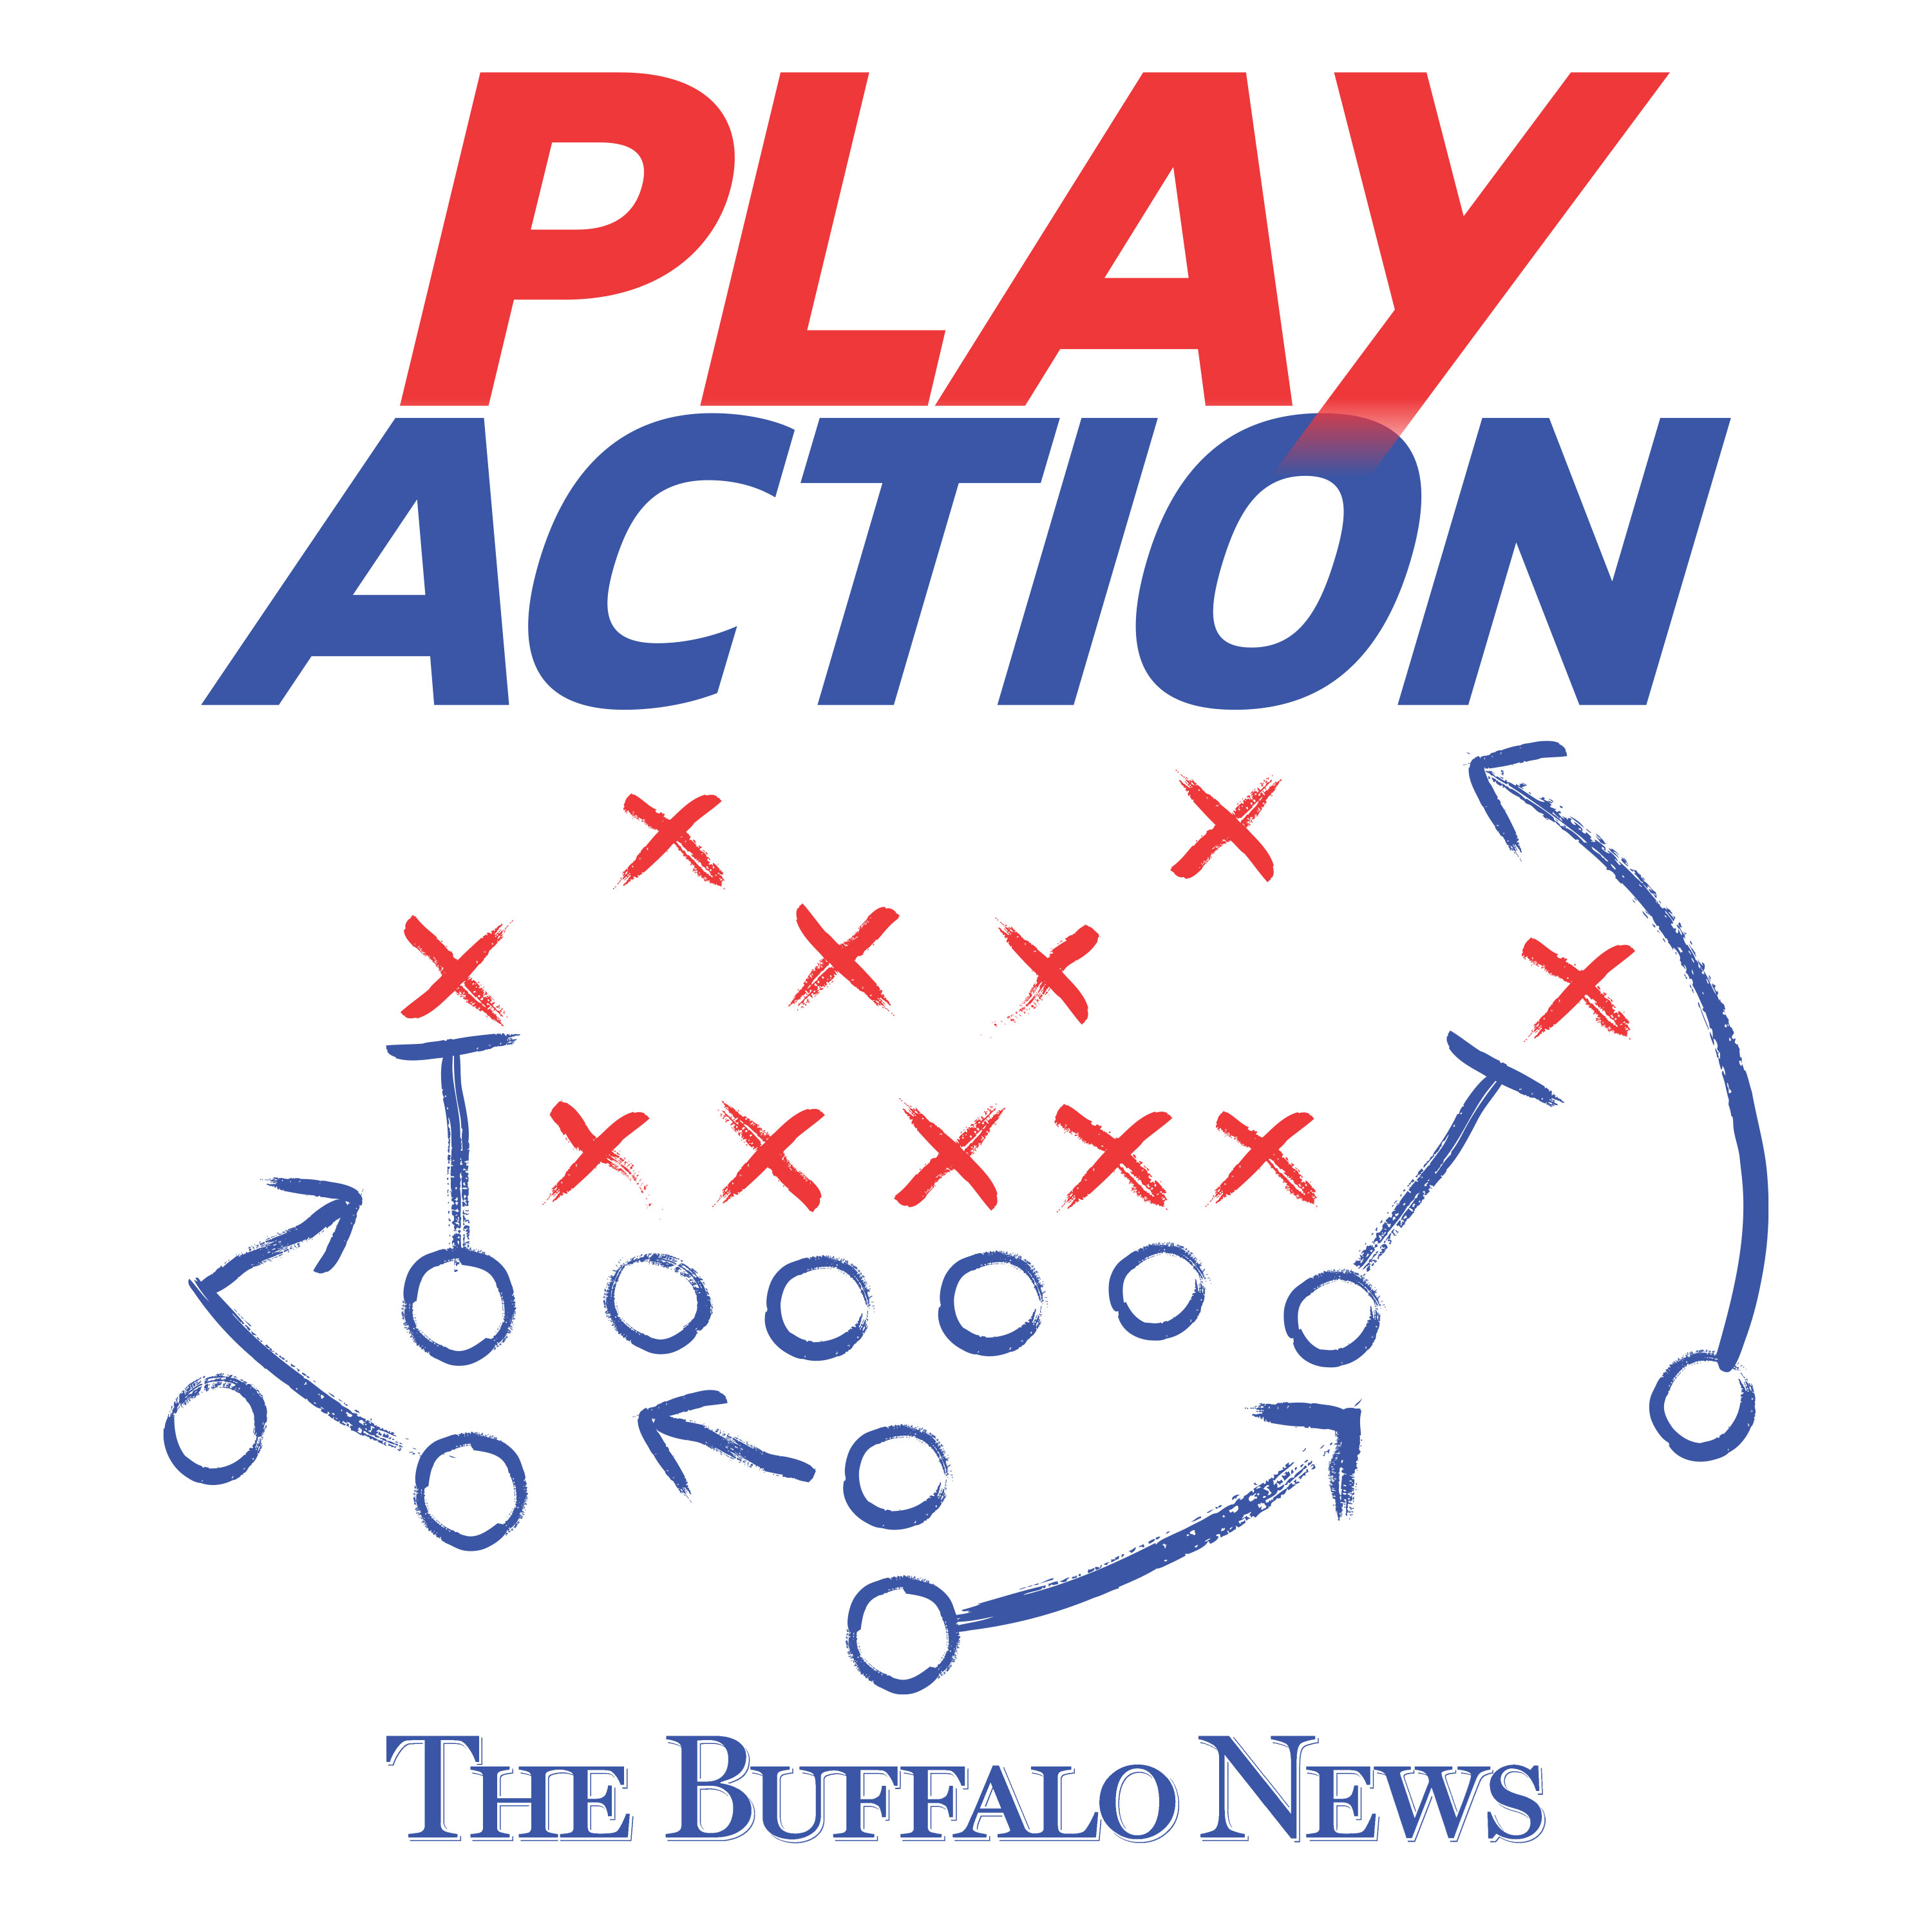 The Bills have an “x-factor” as they push for a playoff spot